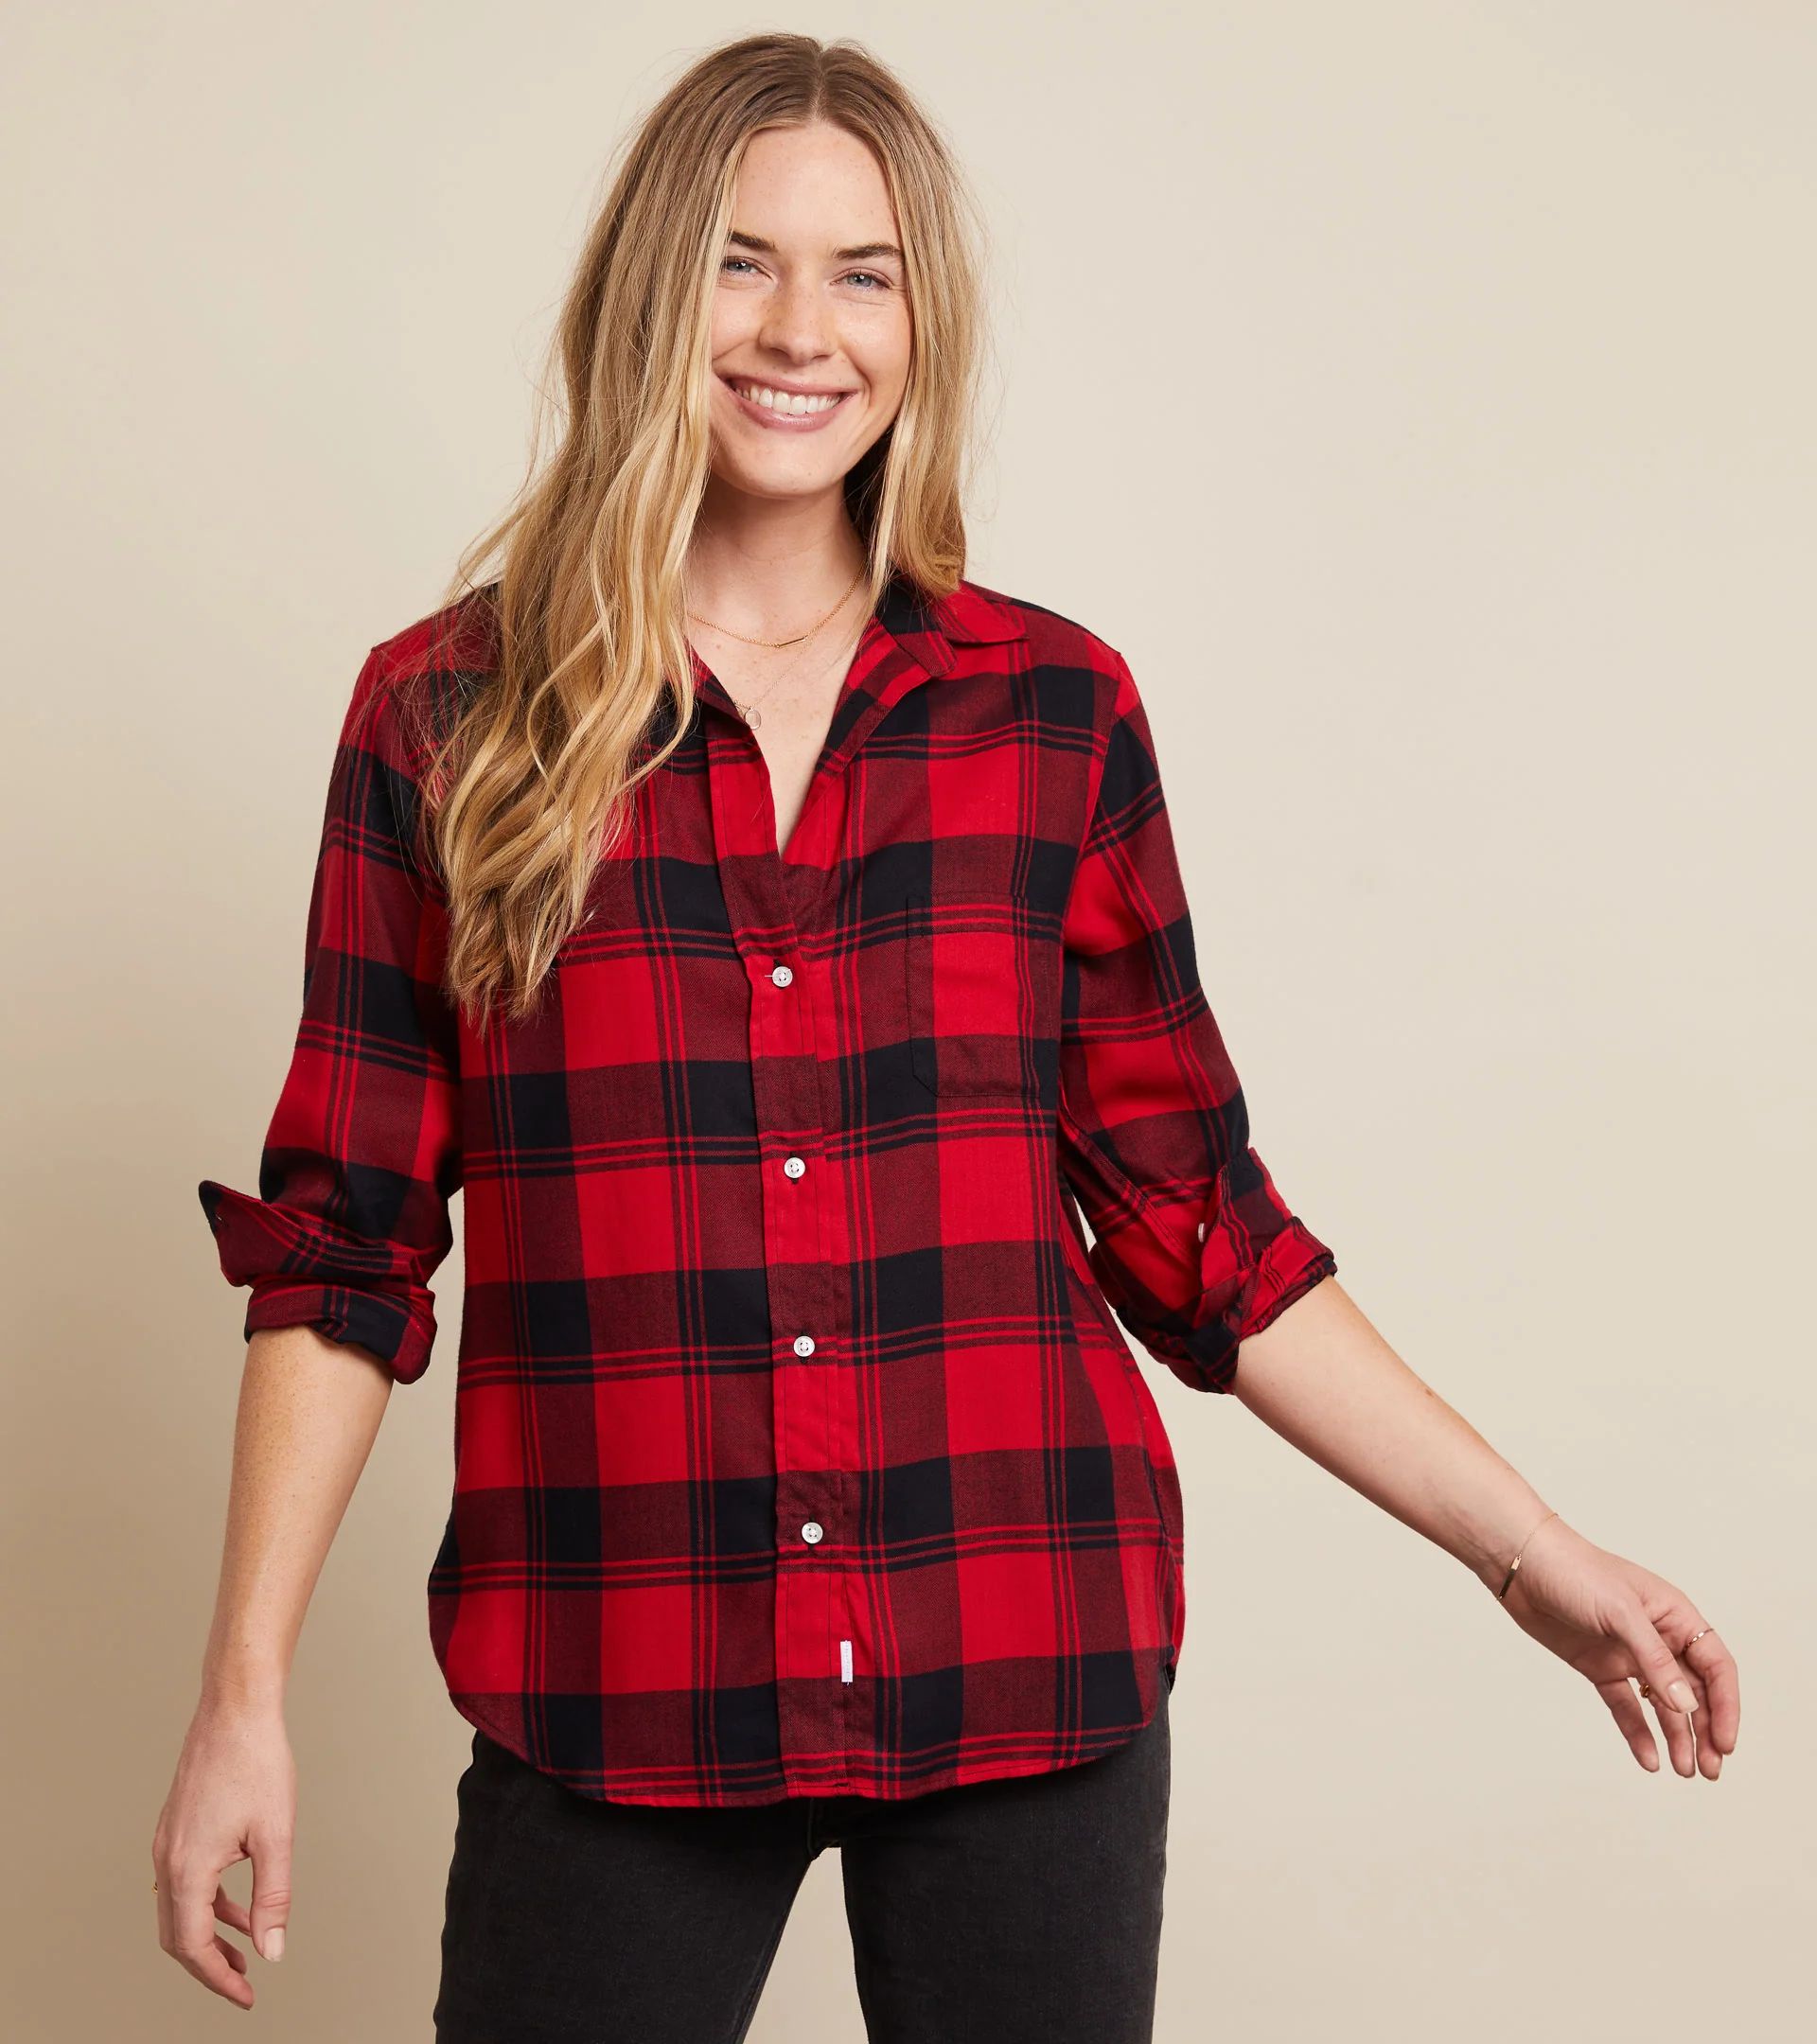 The Hero Button-Up Shirt Red and Black Plaid, Liquid Flannel | Grayson